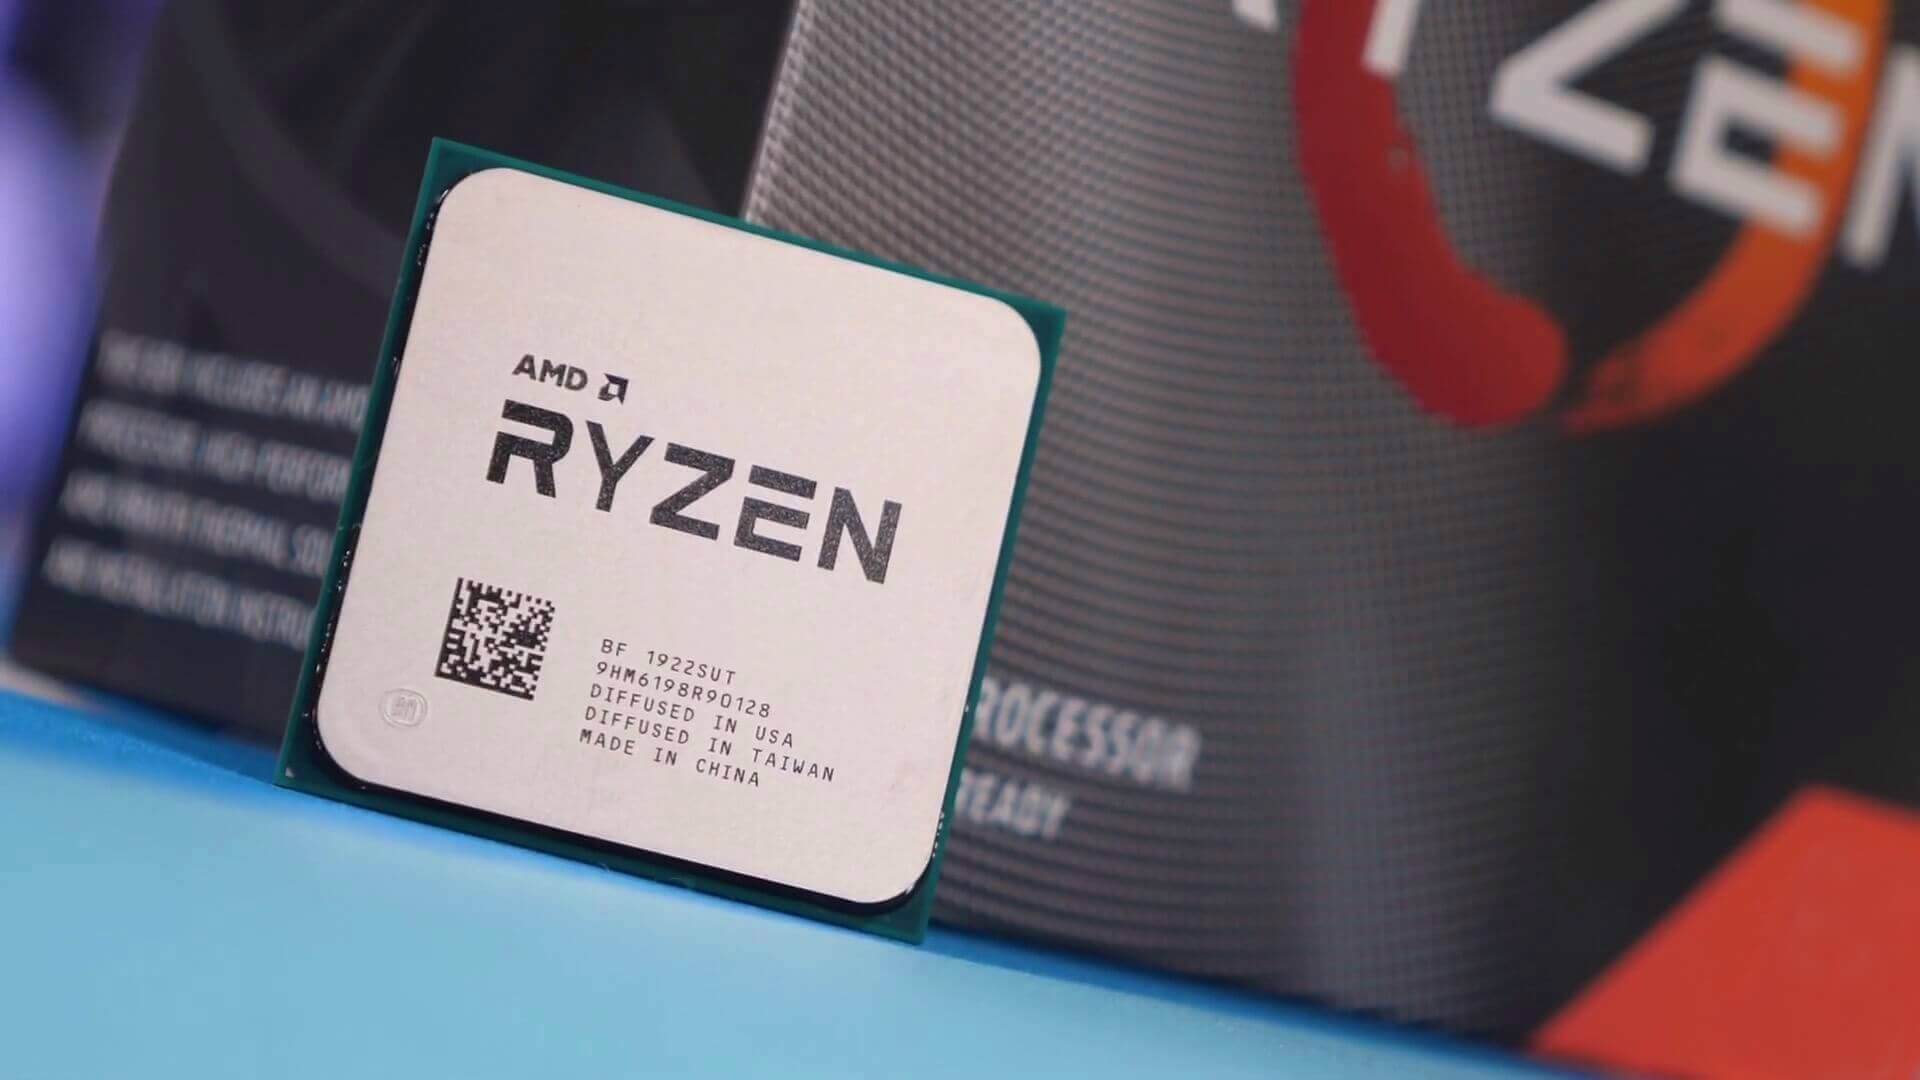 AMD's new Ryzen 3 desktop CPUs get official, coming in May starting at $99